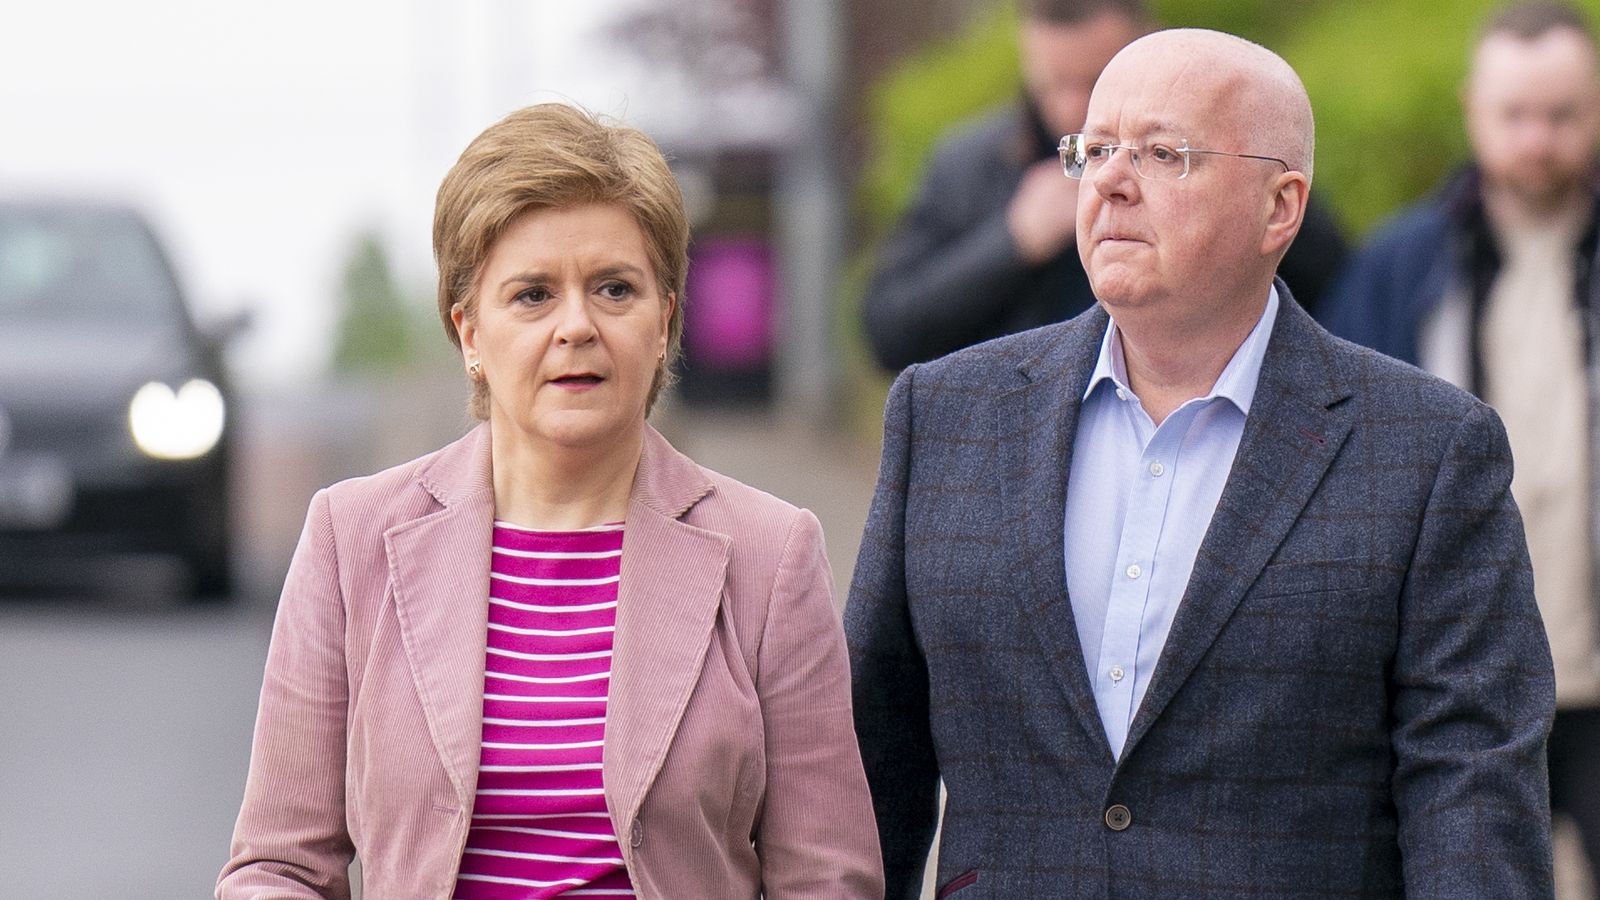 Peter Murrell charged in connection with embezzlement of funds from SNP